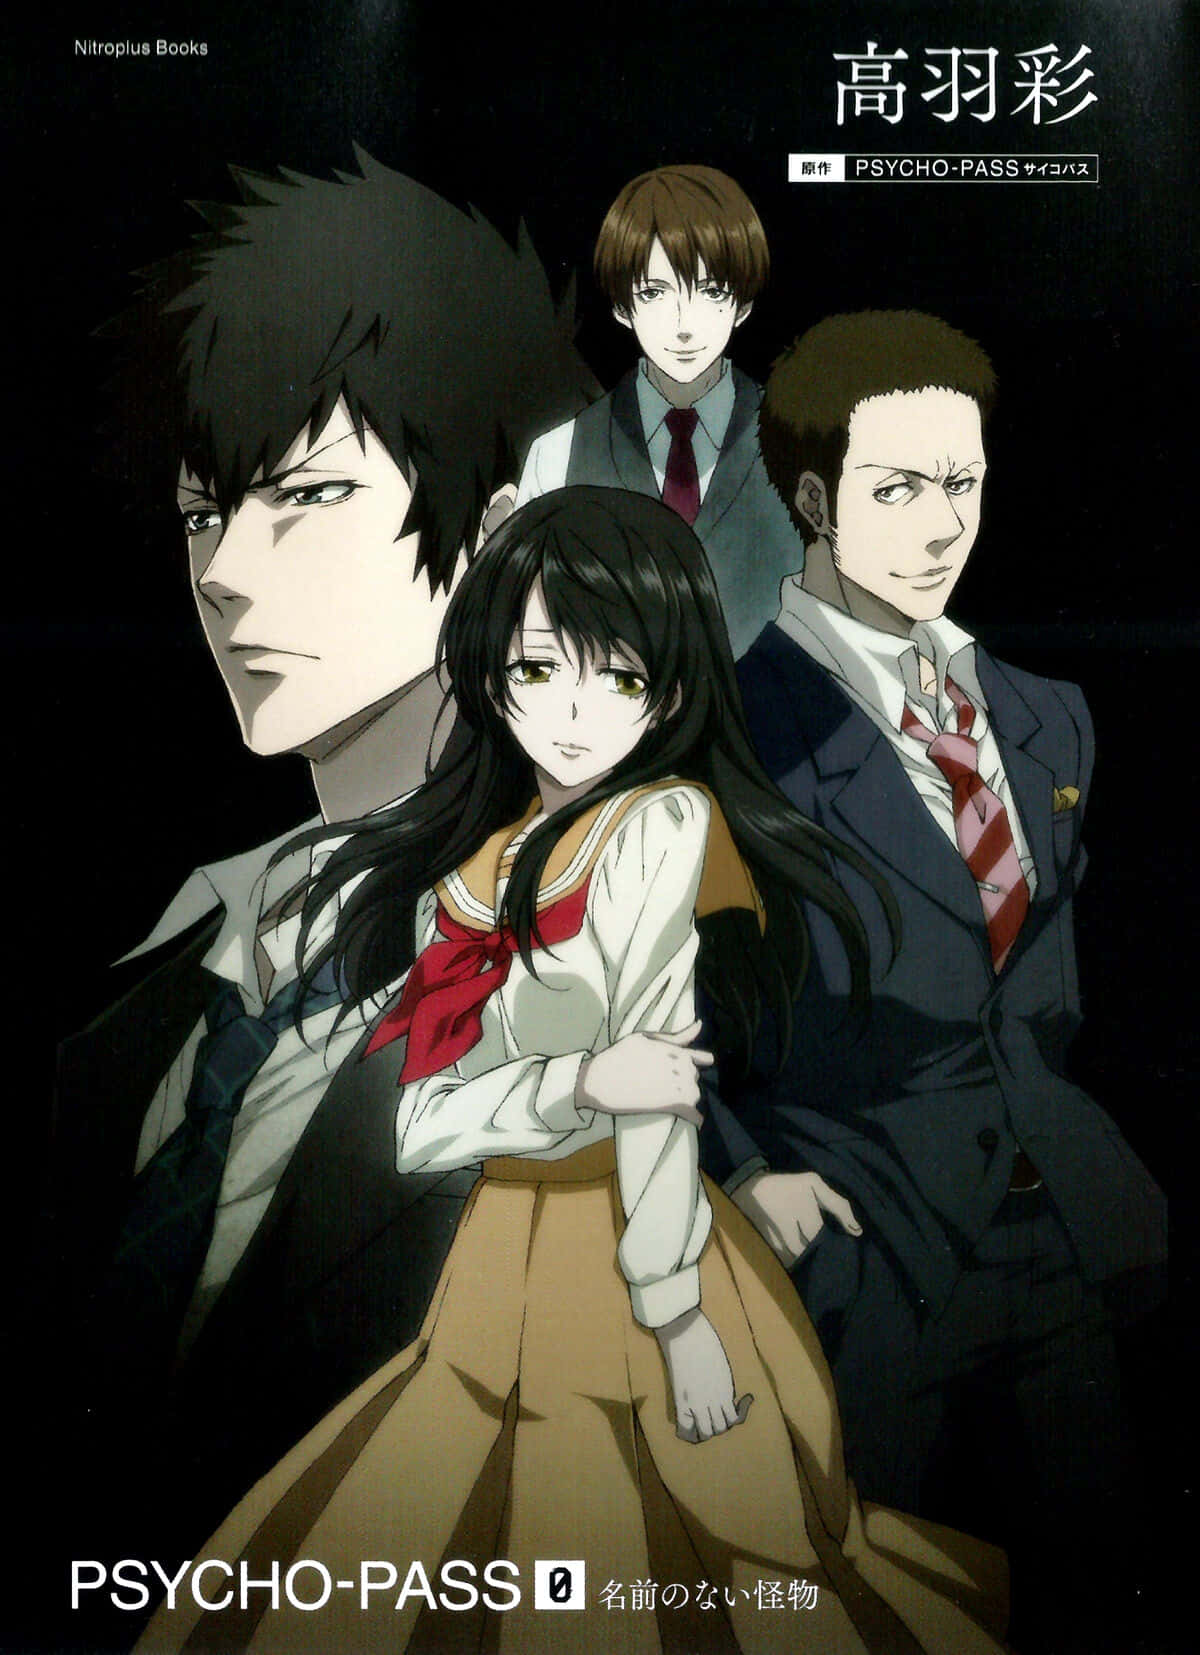 Enforcers And Inspectors Of Public Safety Bureau - Psycho-pass Anime Scene Wallpaper